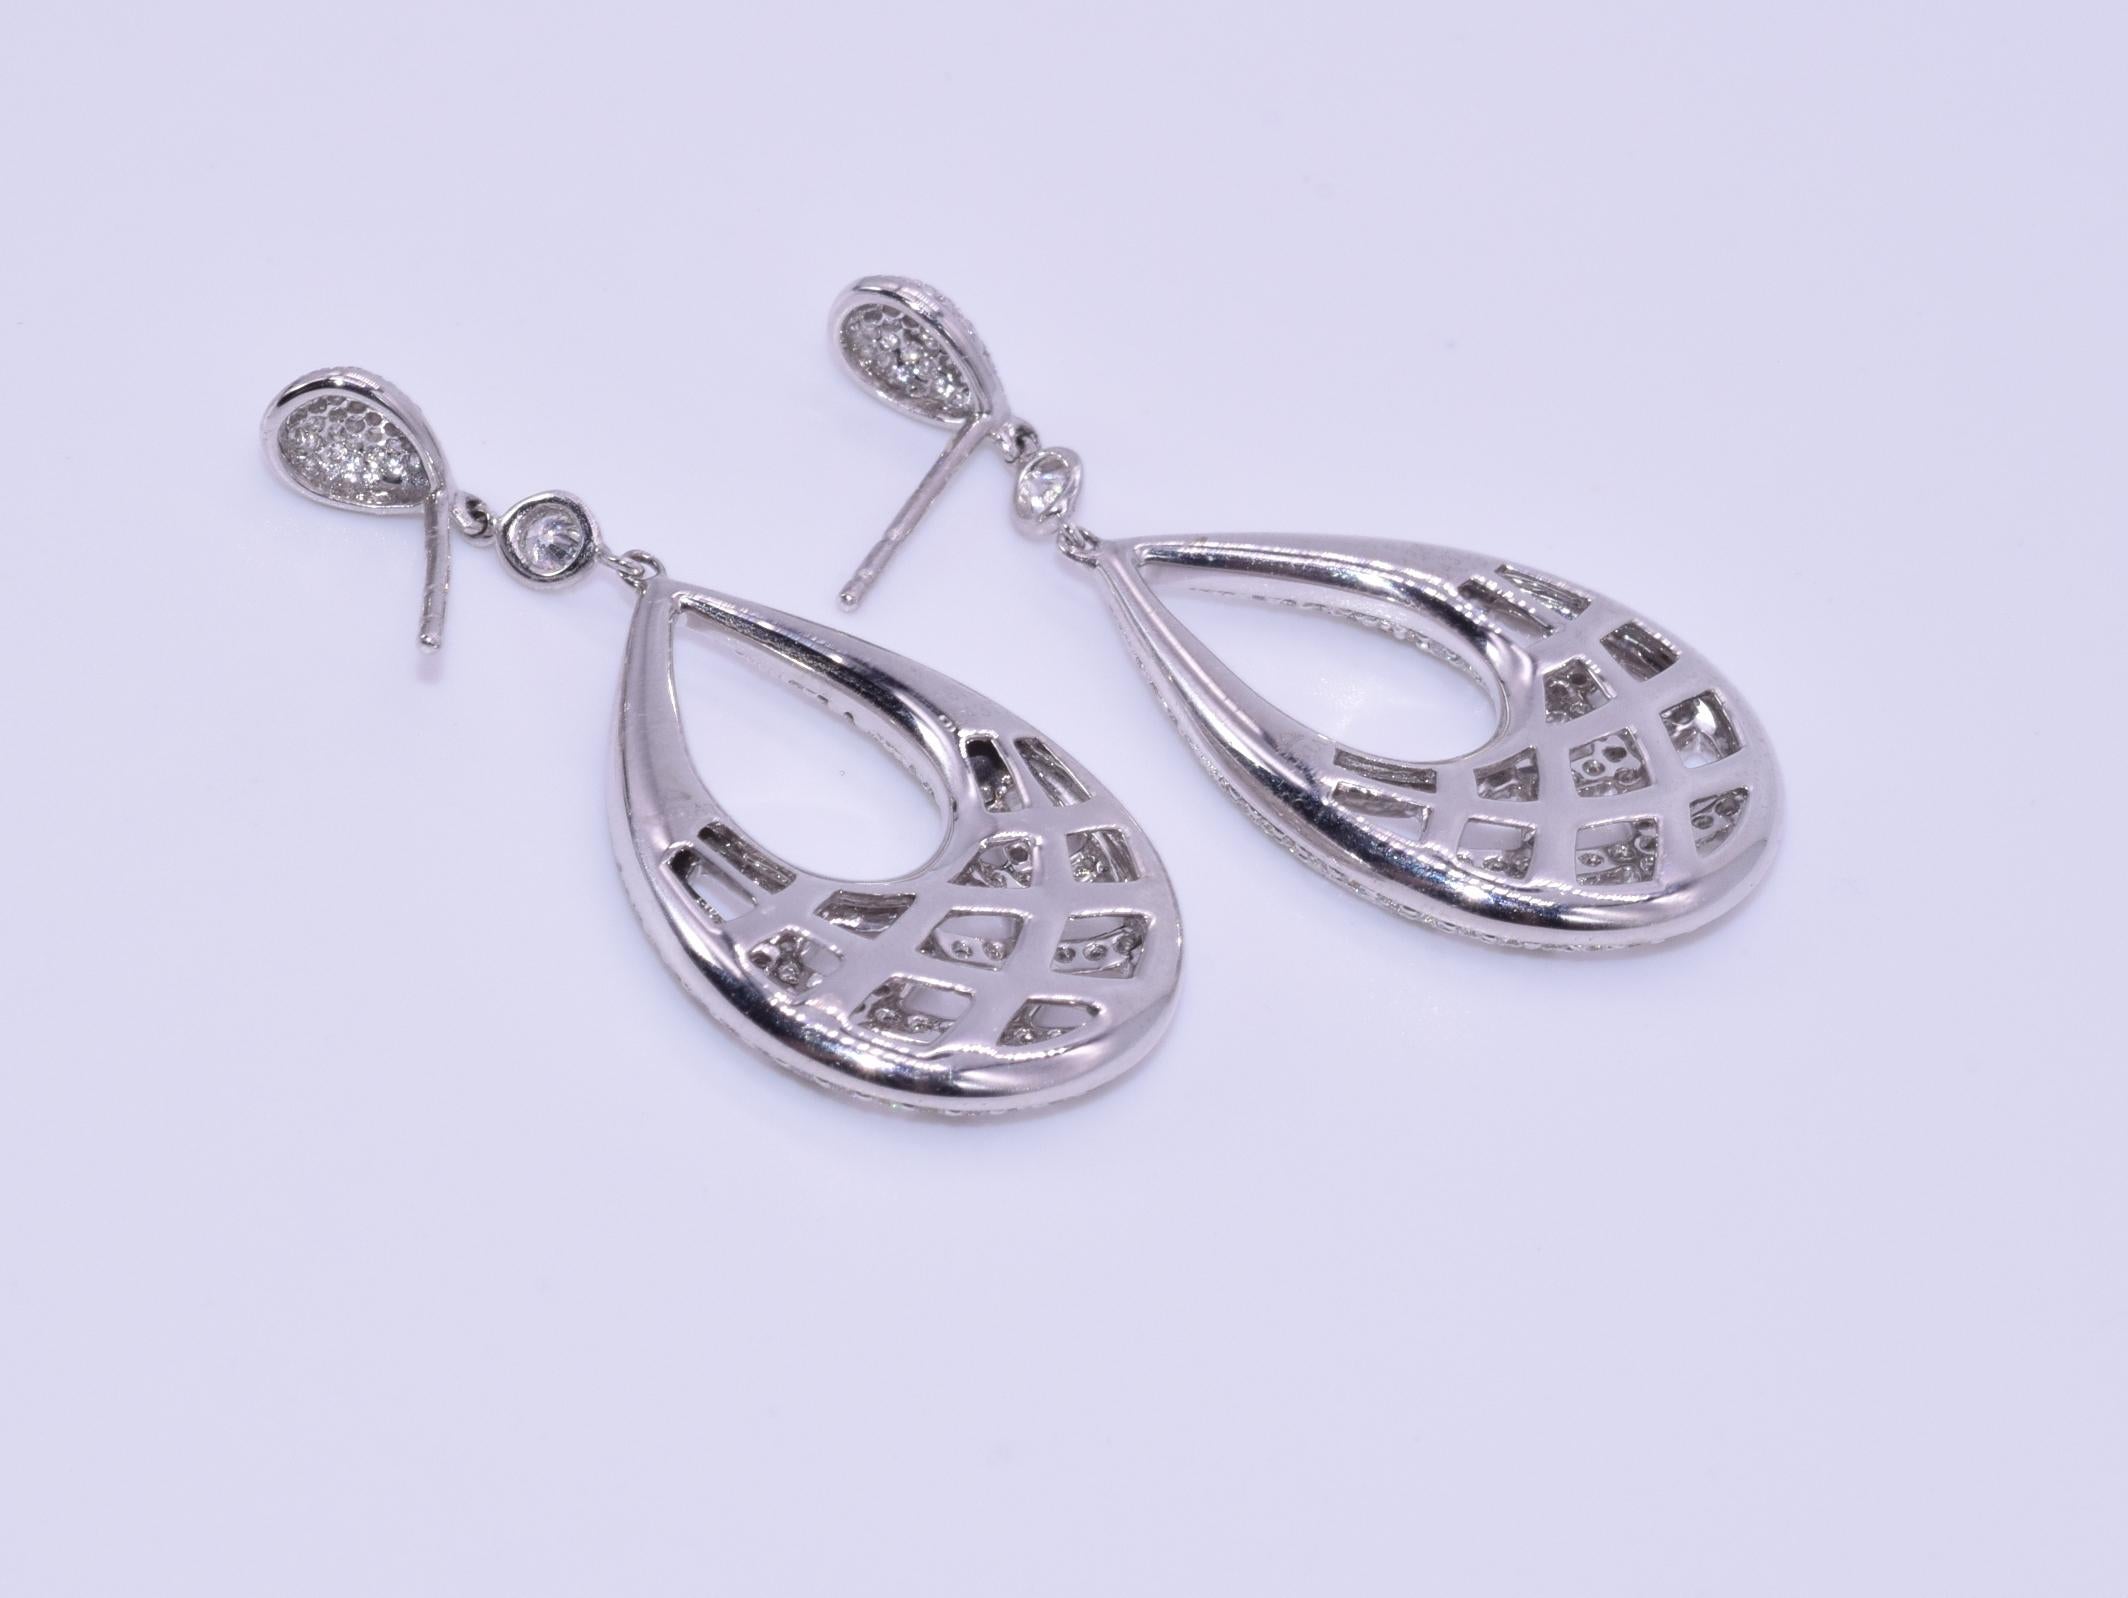 18k White Gold Diamond Earrings, Signed Kwiat

These earrings are from the Jacquard Collection with 376 round brilliant diamonds totaling 1.63 carats, FG/VS mounted in 18k white gold.  The original retail was $16,800.

Since 1907, Kwiat has led the